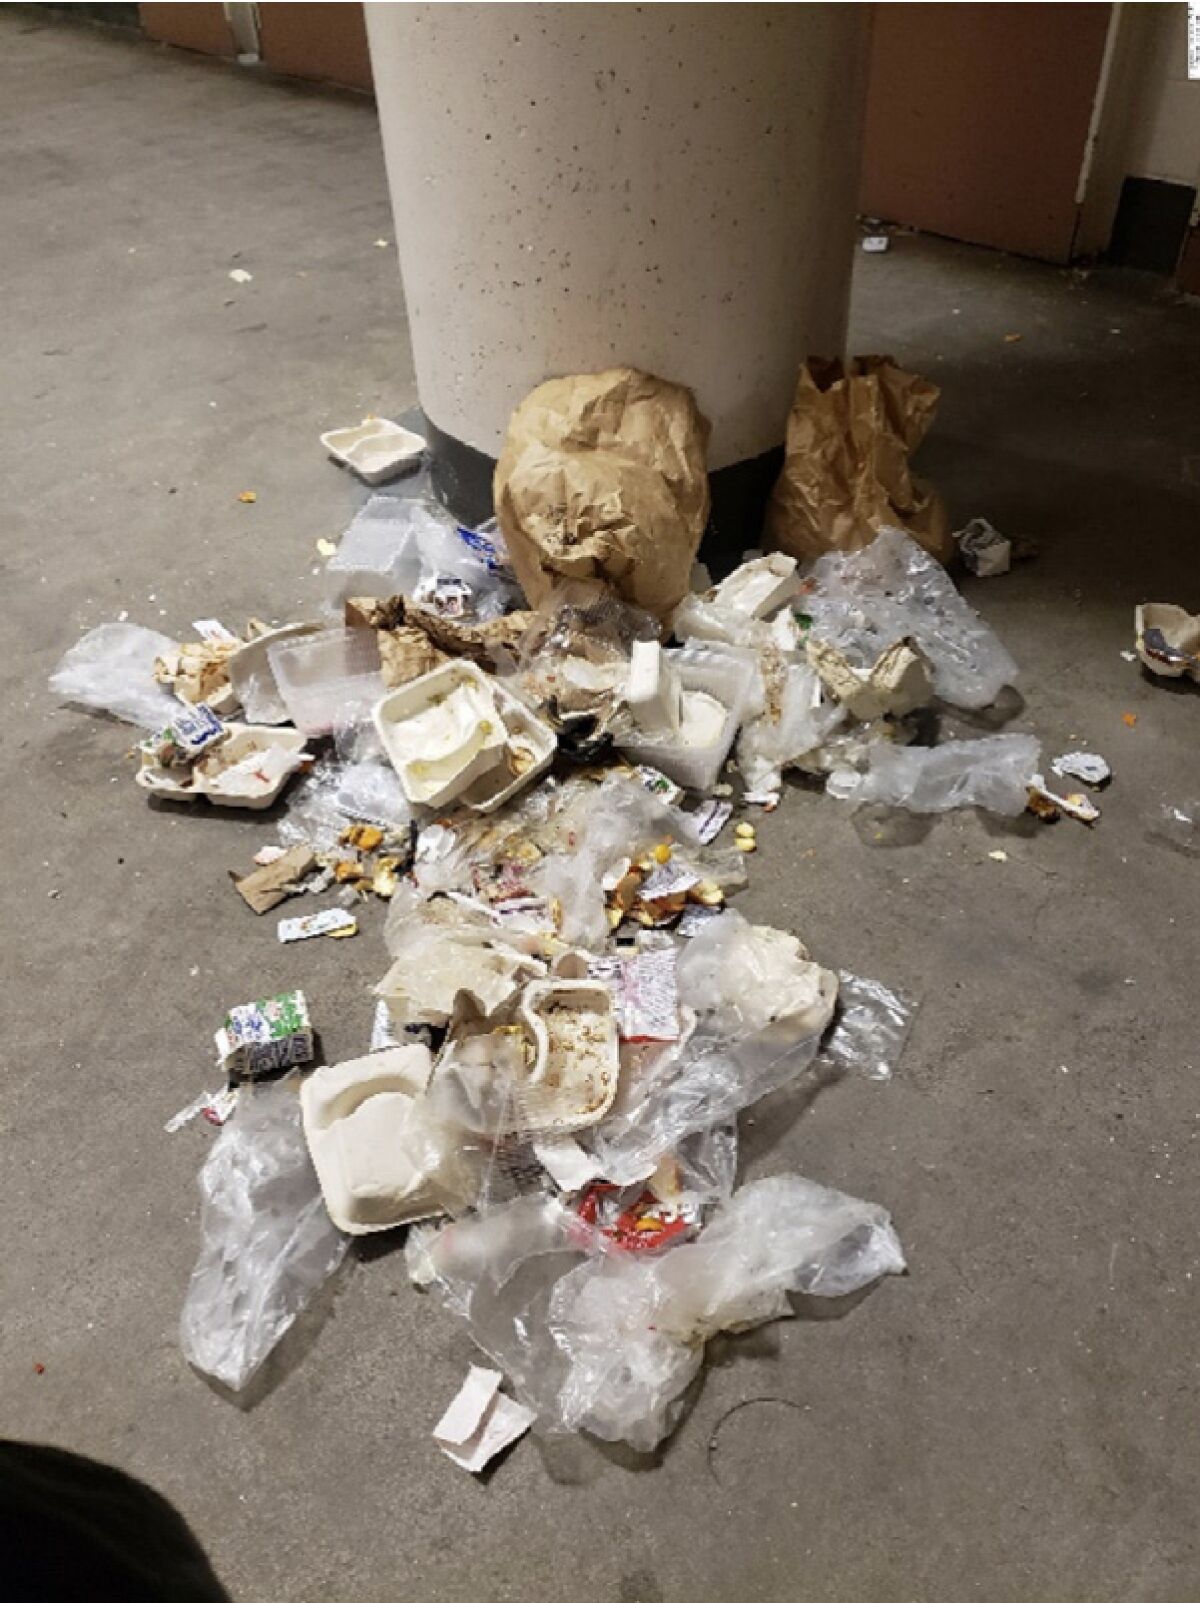 Photos of filthy conditions in San Diego County jails.